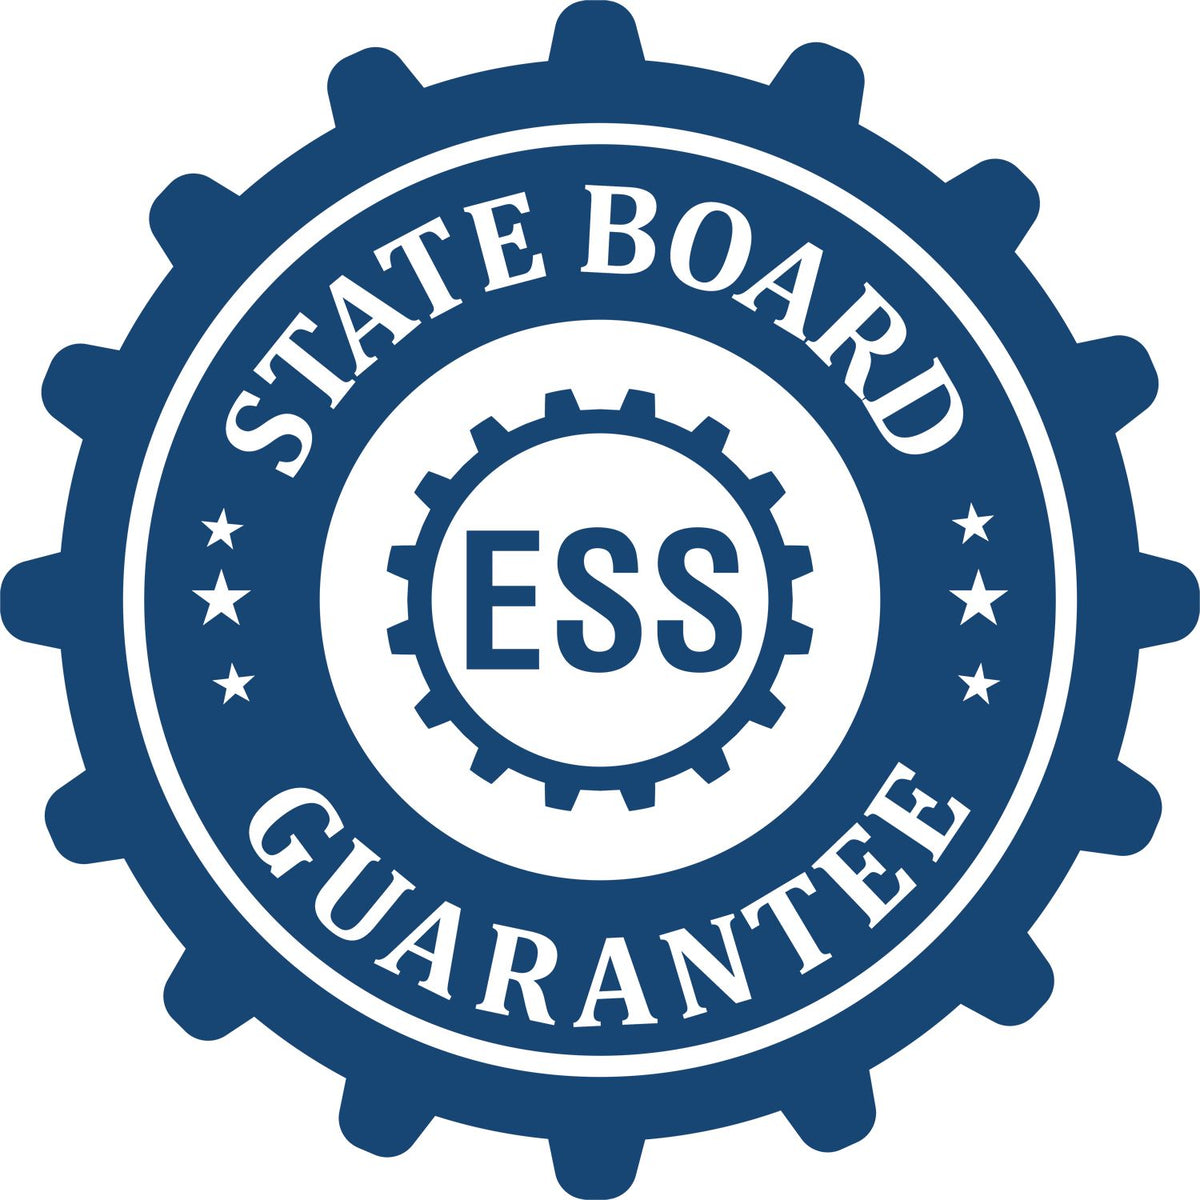 An emblem in a gear shape illustrating a state board guarantee for the Washington Landscape Architectural Seal Stamp product.